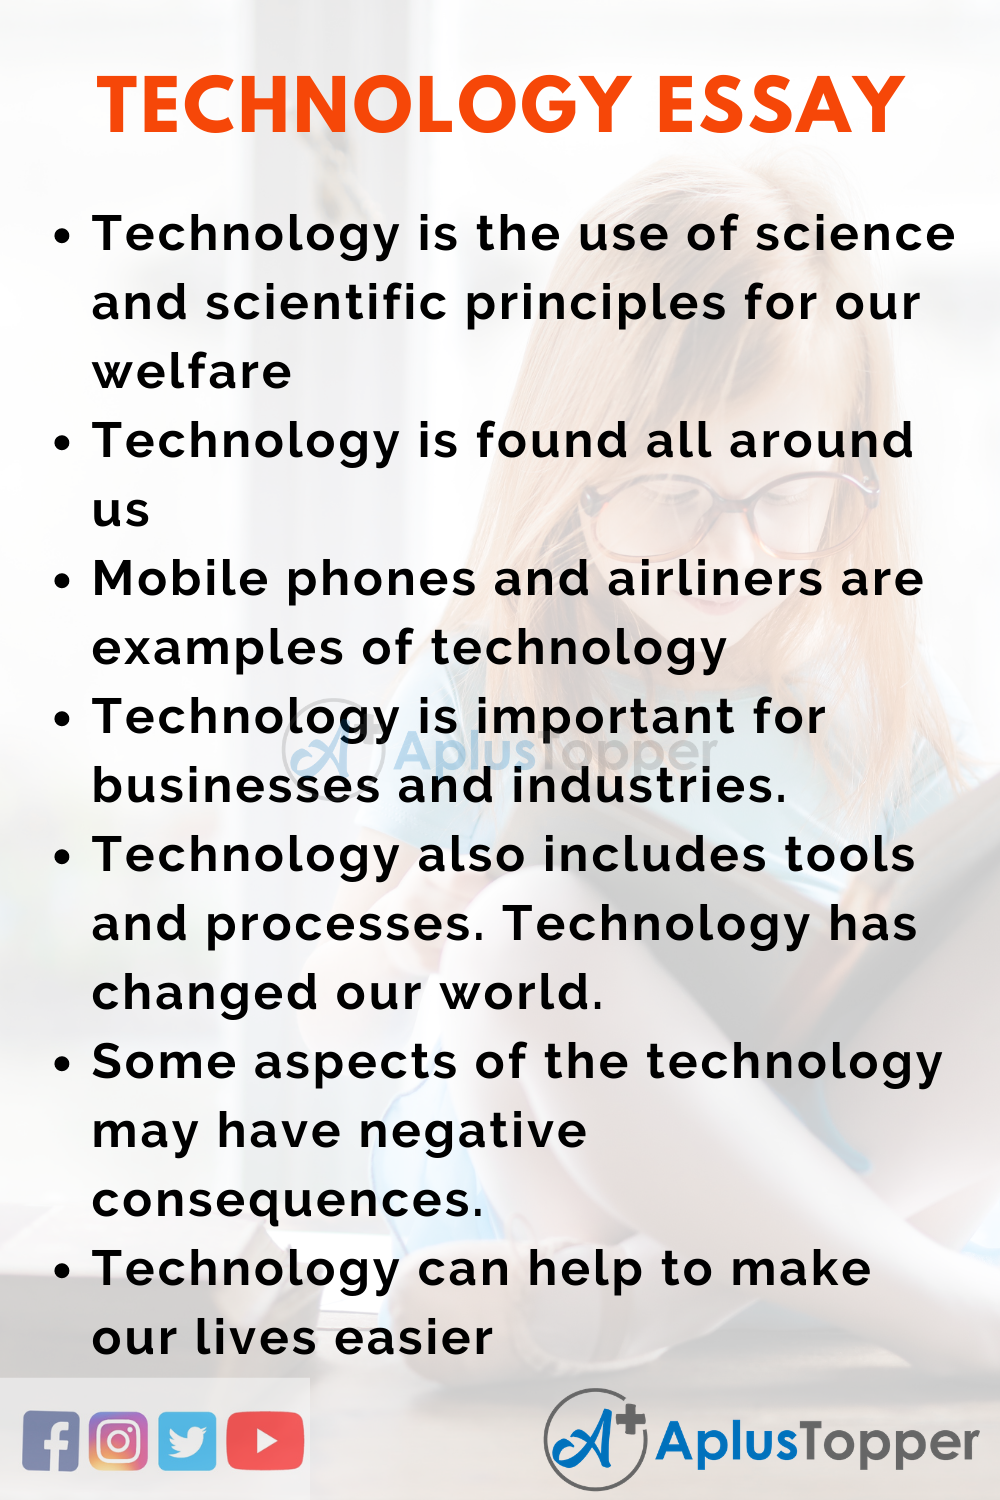 Advantages and disadvantages of technology essay 200 words